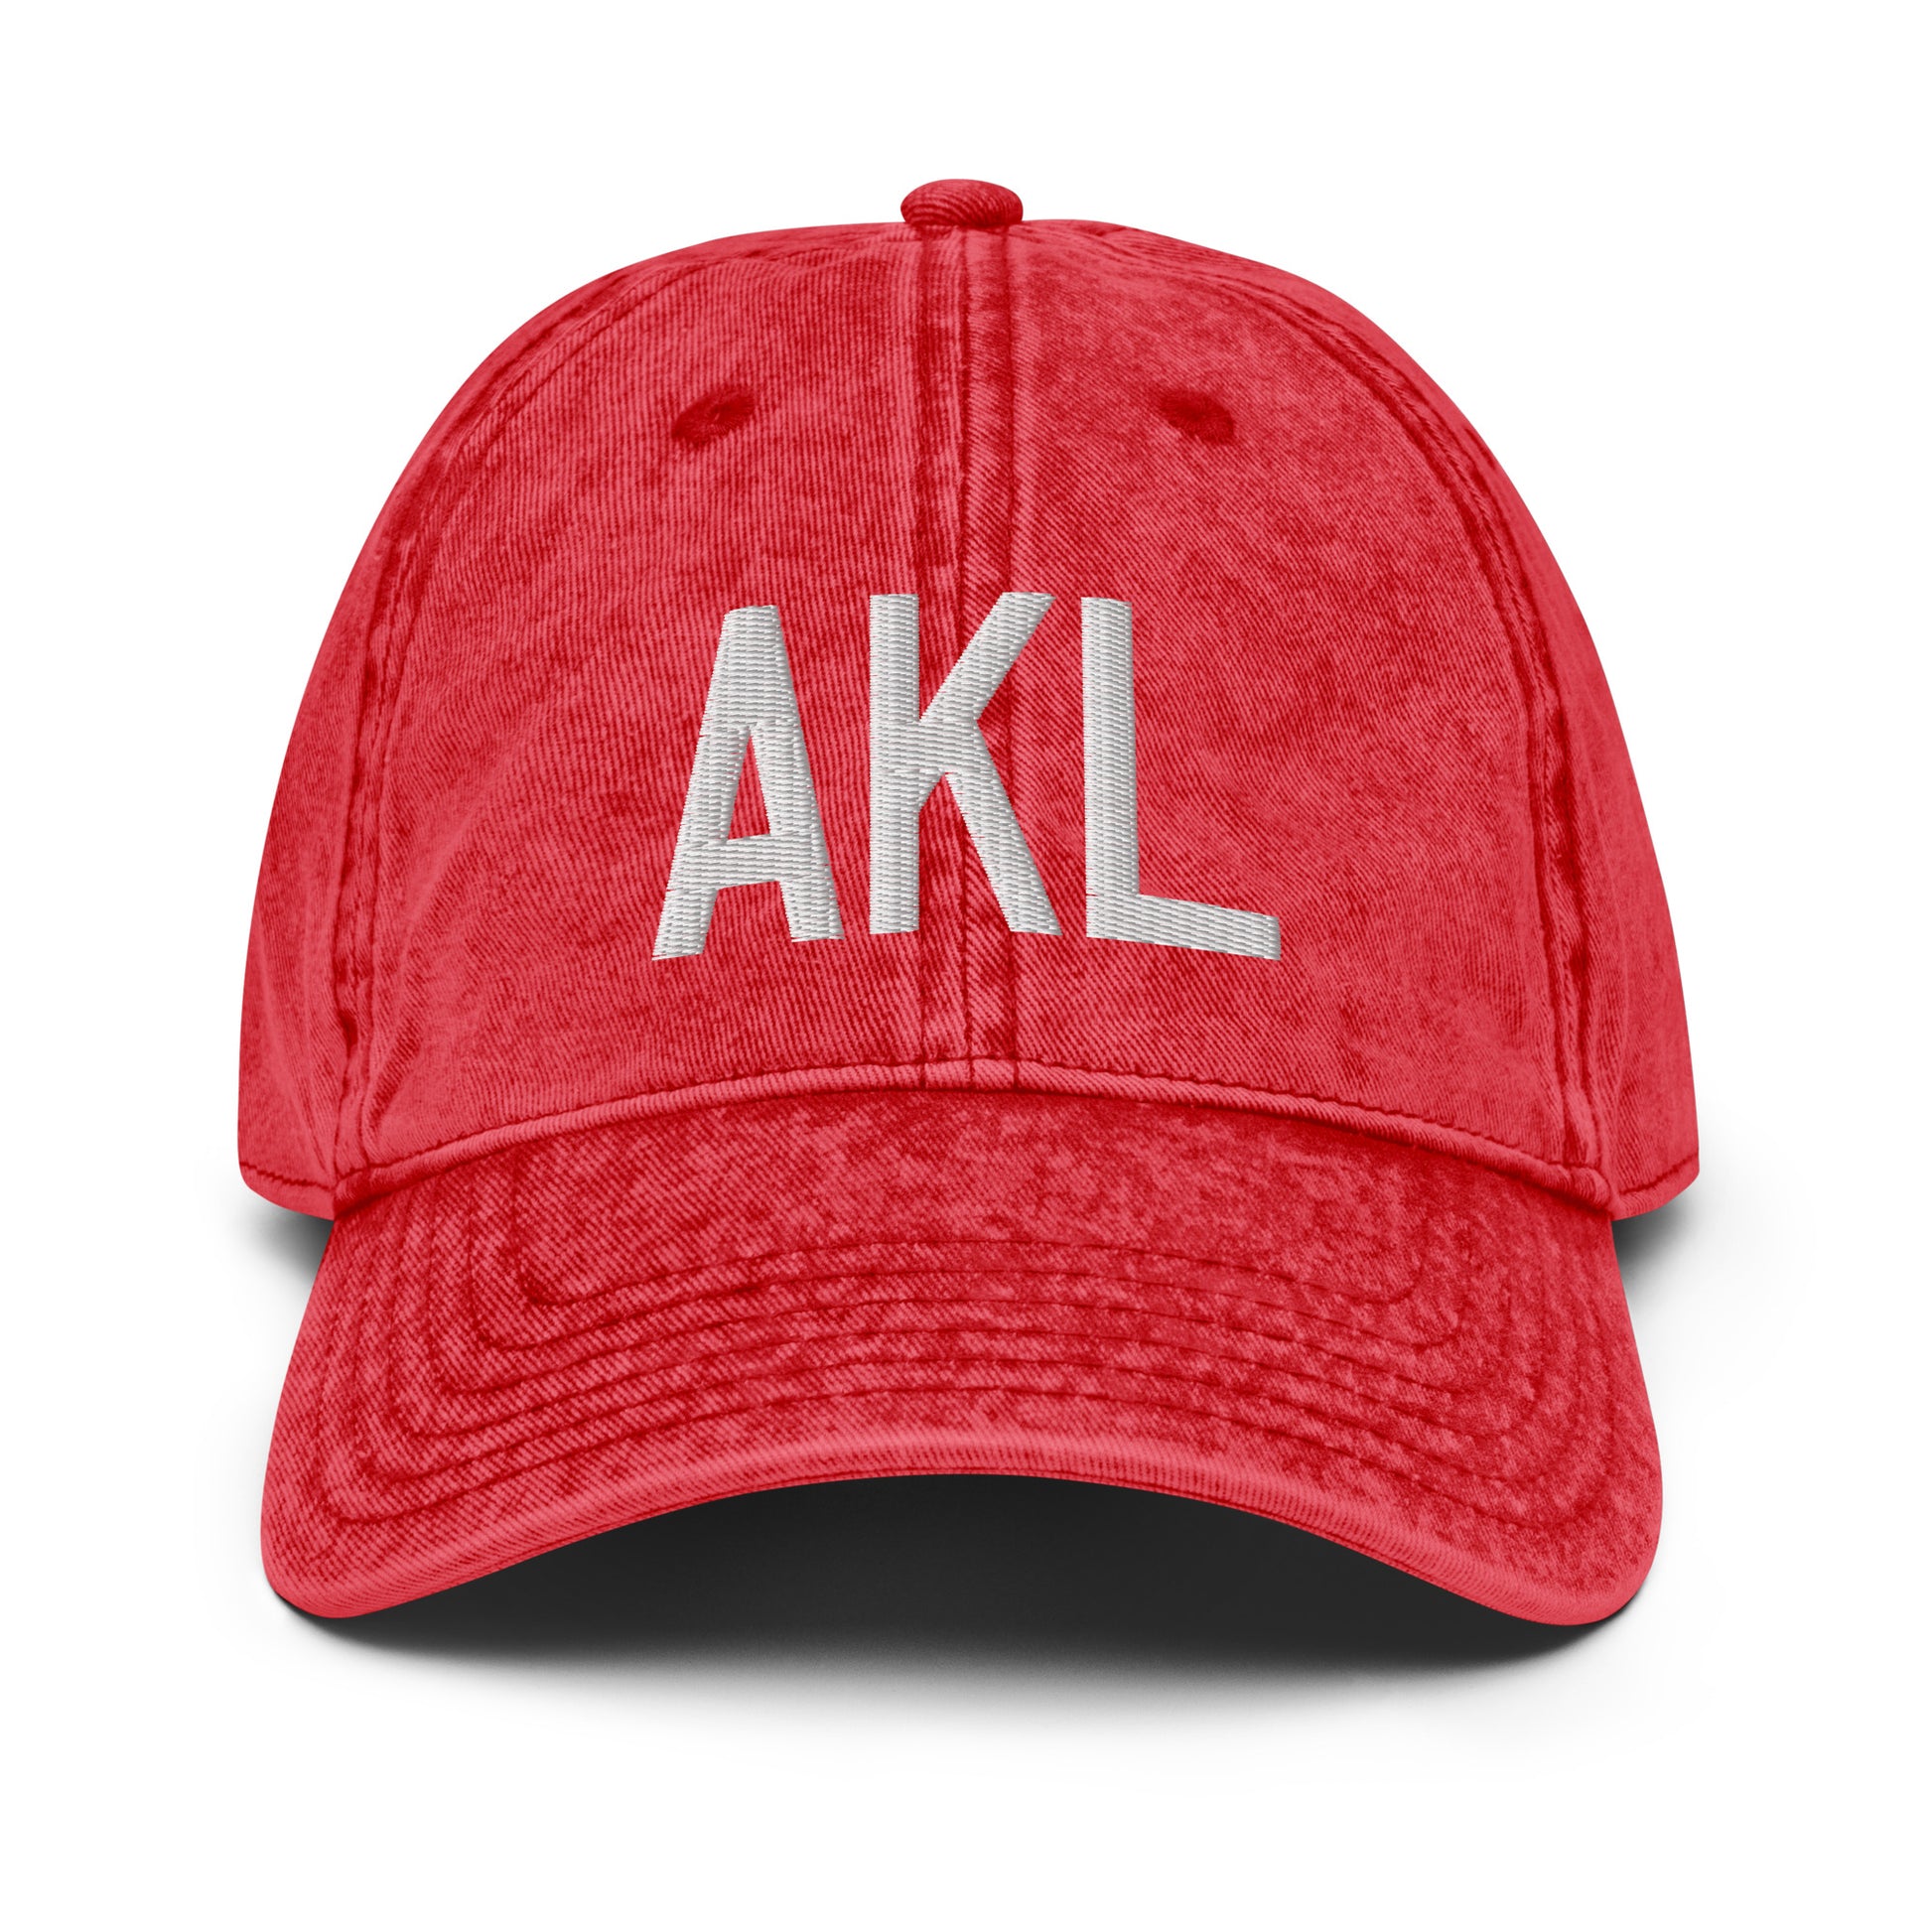 Airport Code Twill Cap - White • AKL Auckland • YHM Designs - Image 22